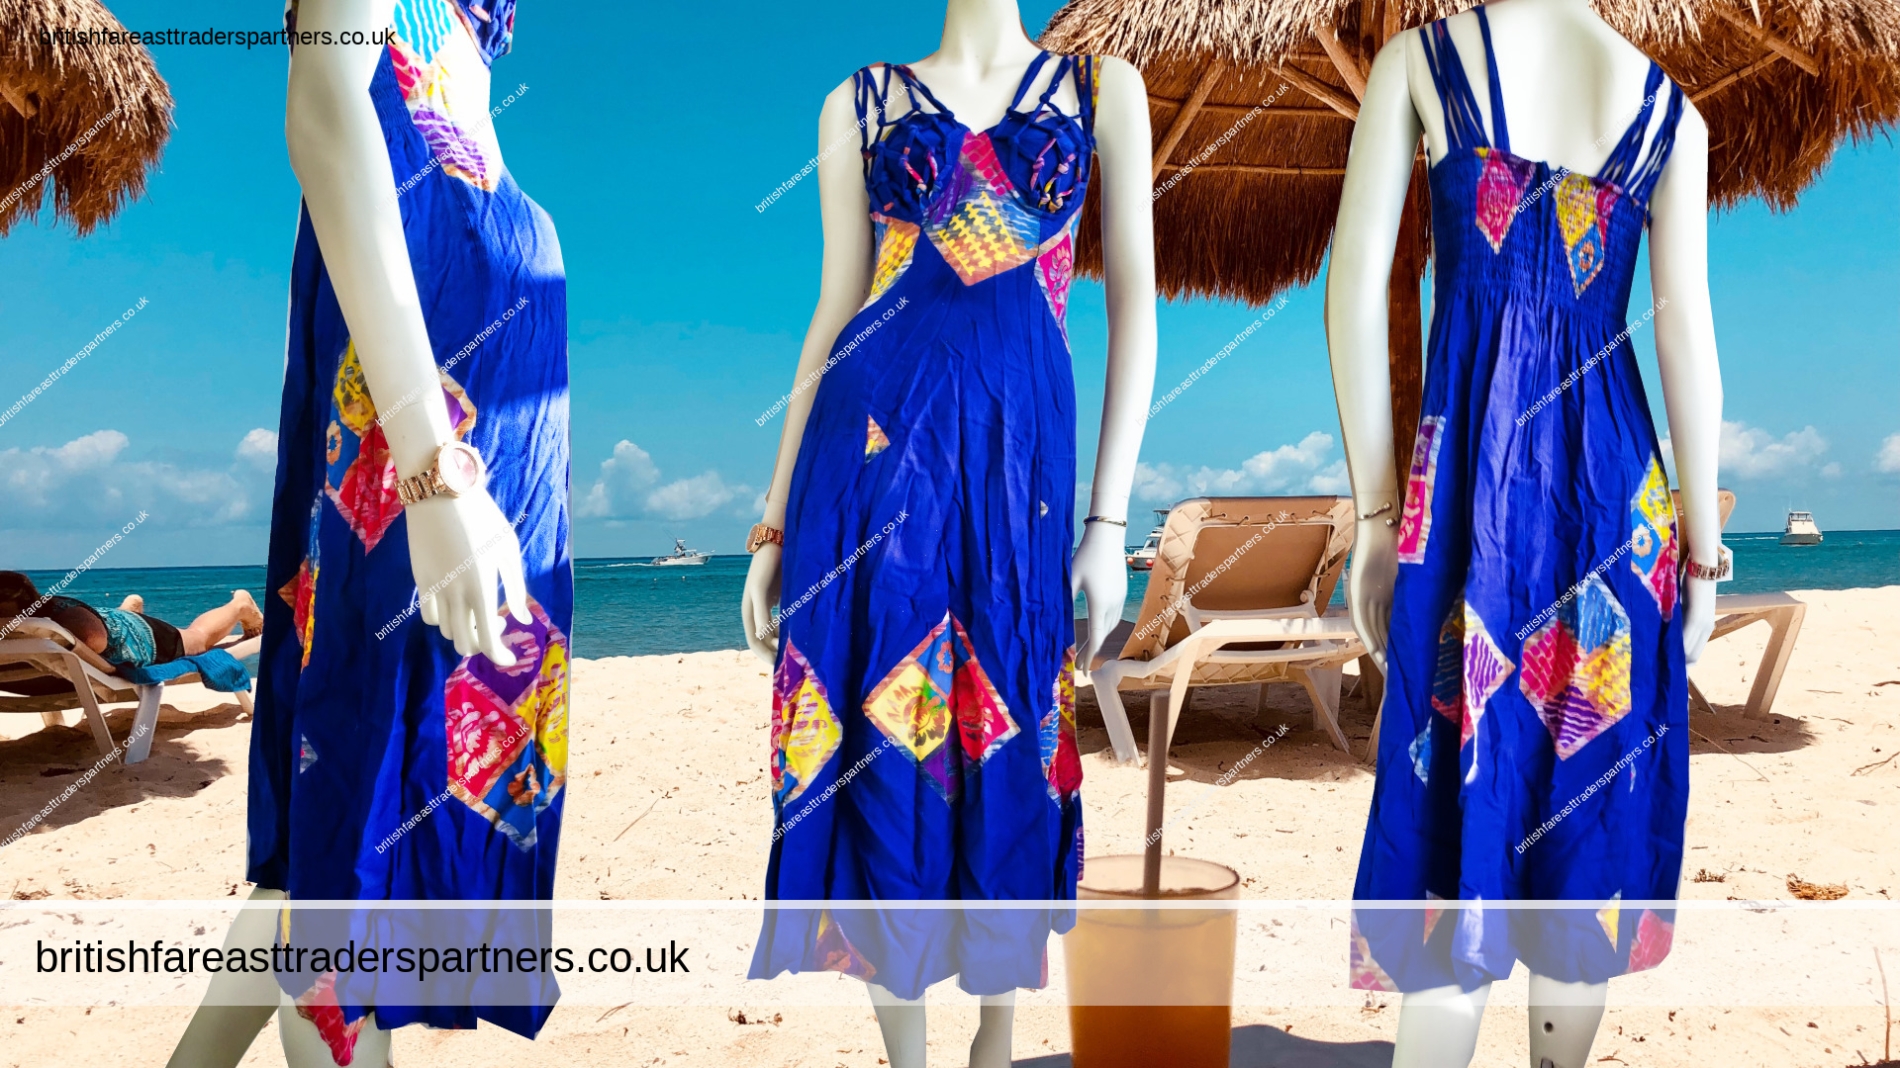 LADIES ‘ INDIGO SUMMER STRAPPY DRESS UK S 8 HAND MADE IN INDONESIA SUMMER | TRAVEL | CASUAL | HOLIDAY | BEACH / RESORT WEAR | FASHION | LIFESTYLE